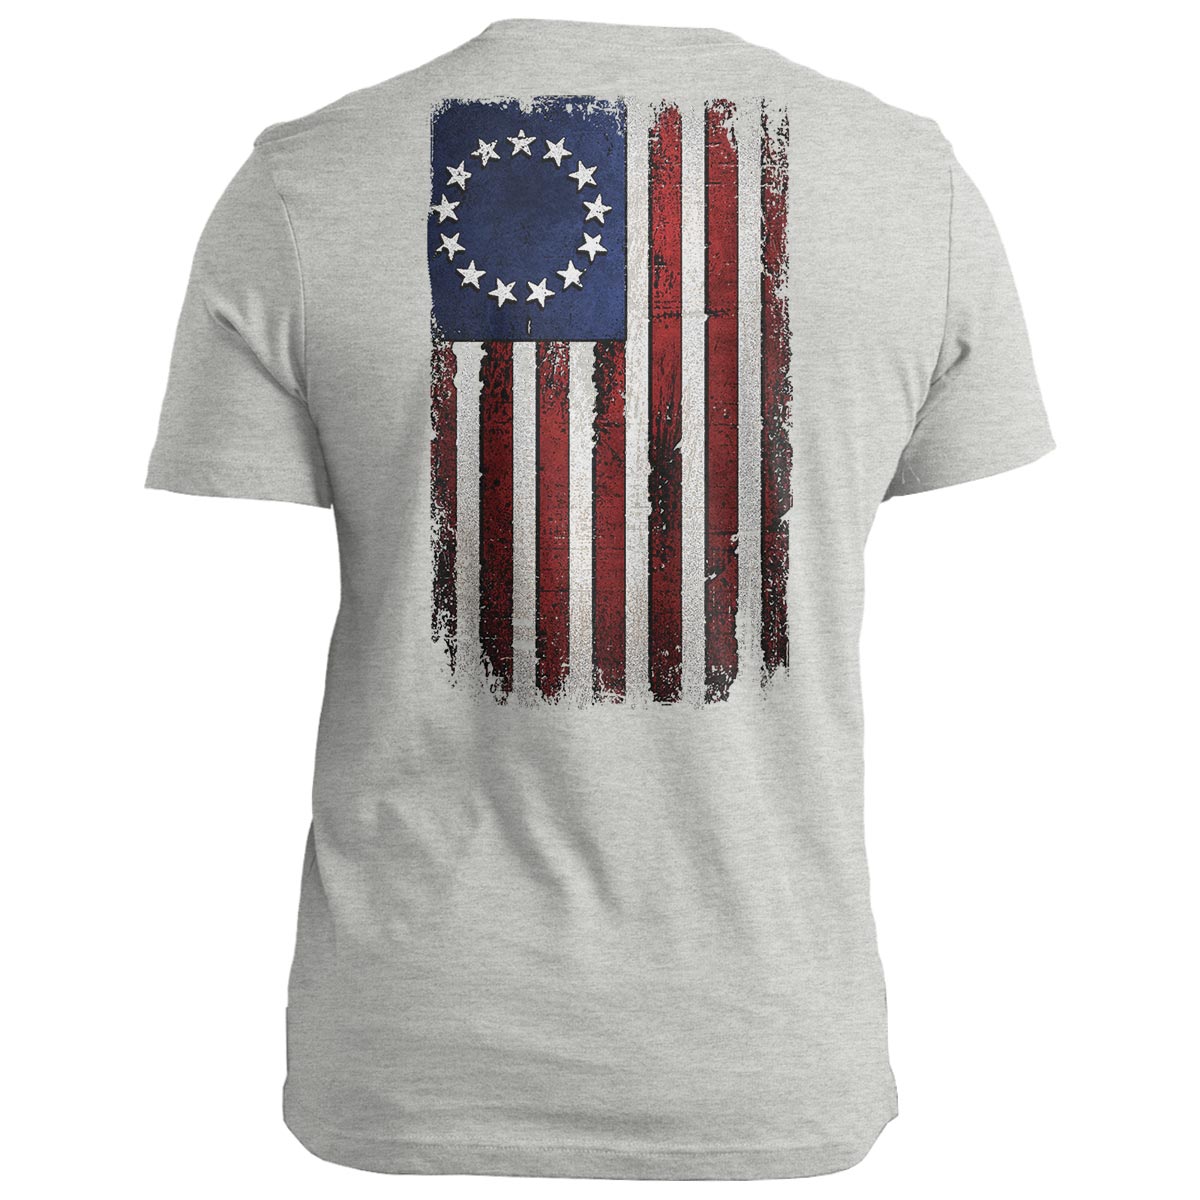 The Union and The Constitution Forever - 1 Nation Design